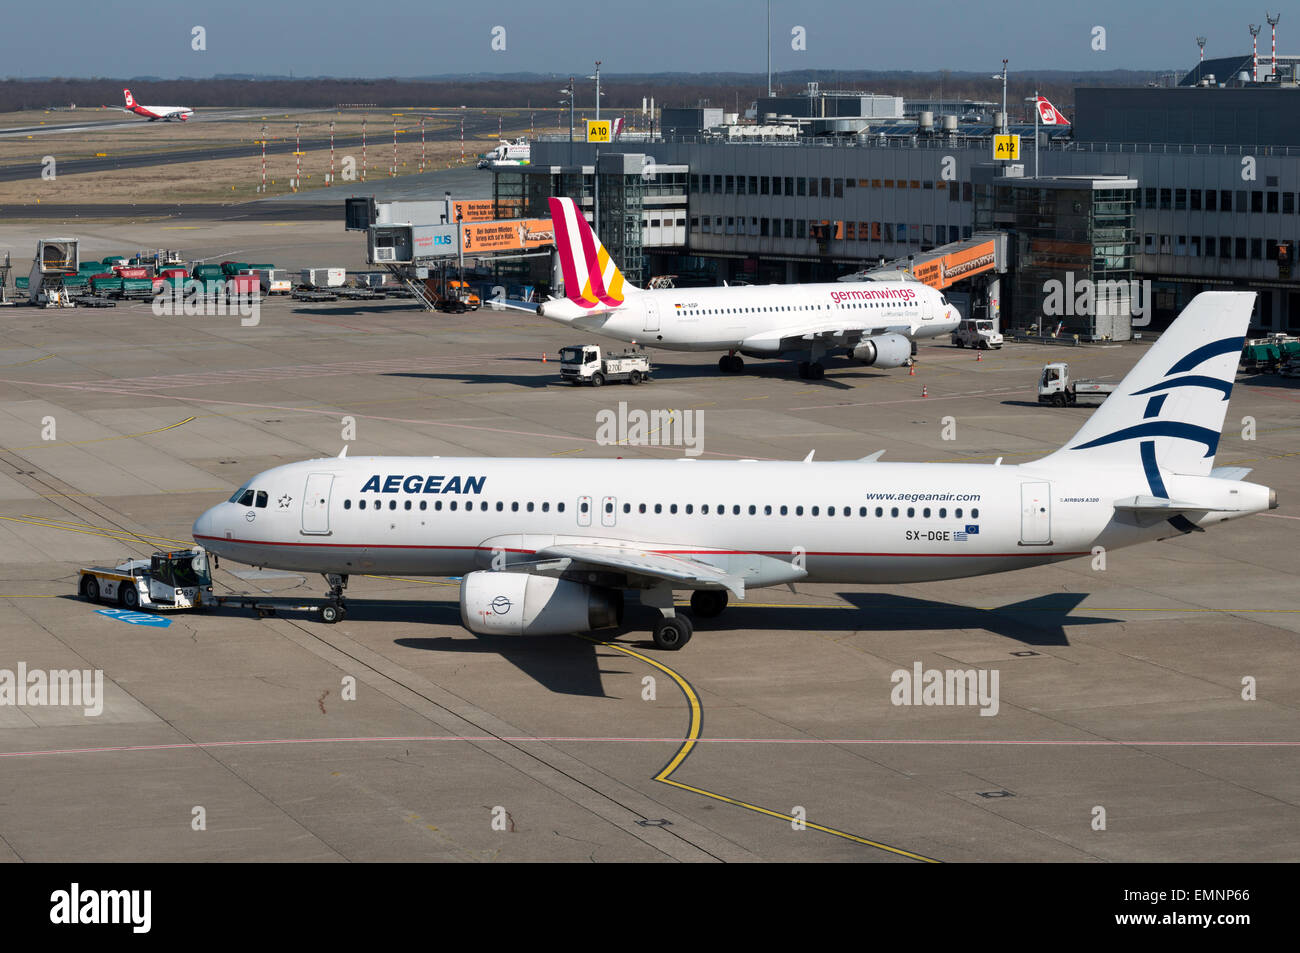 Aegean Airlines Airbus A320 airliner, Dusseldorf International Airport Germany Stock Photo